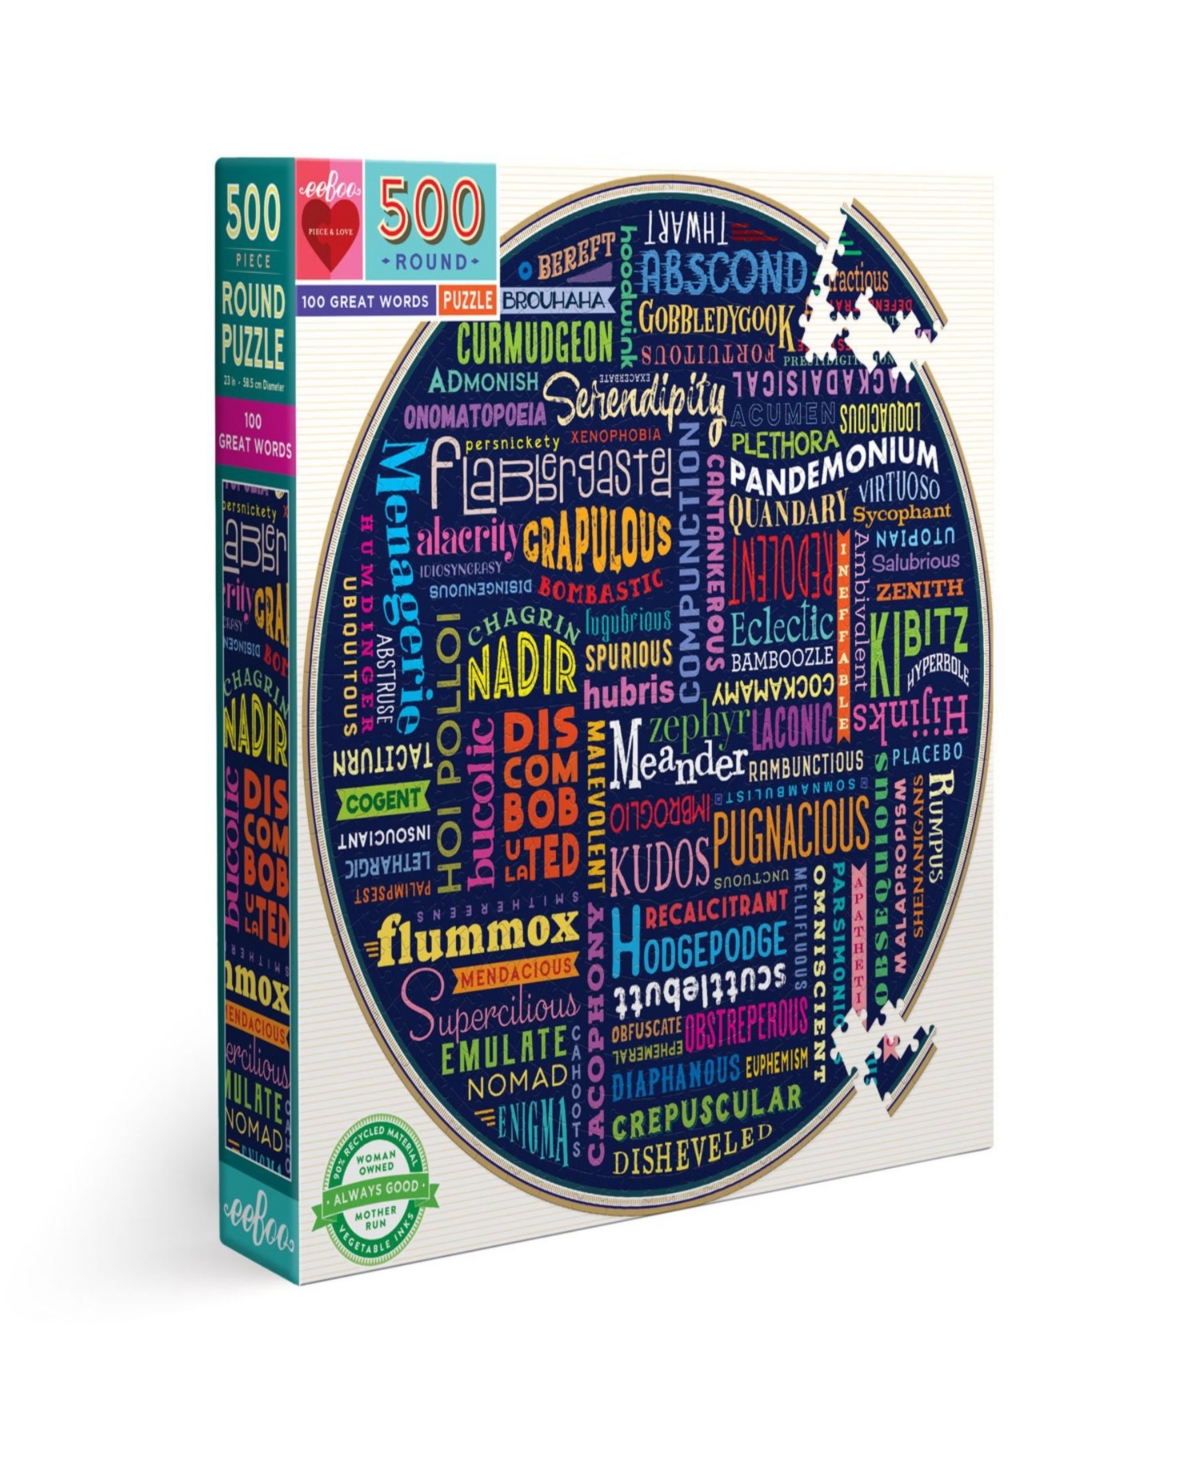 Eeboo Piece And Love 100 Great Words Round Circle Jigsaw Puzzle Set, 500 Piece In Multi